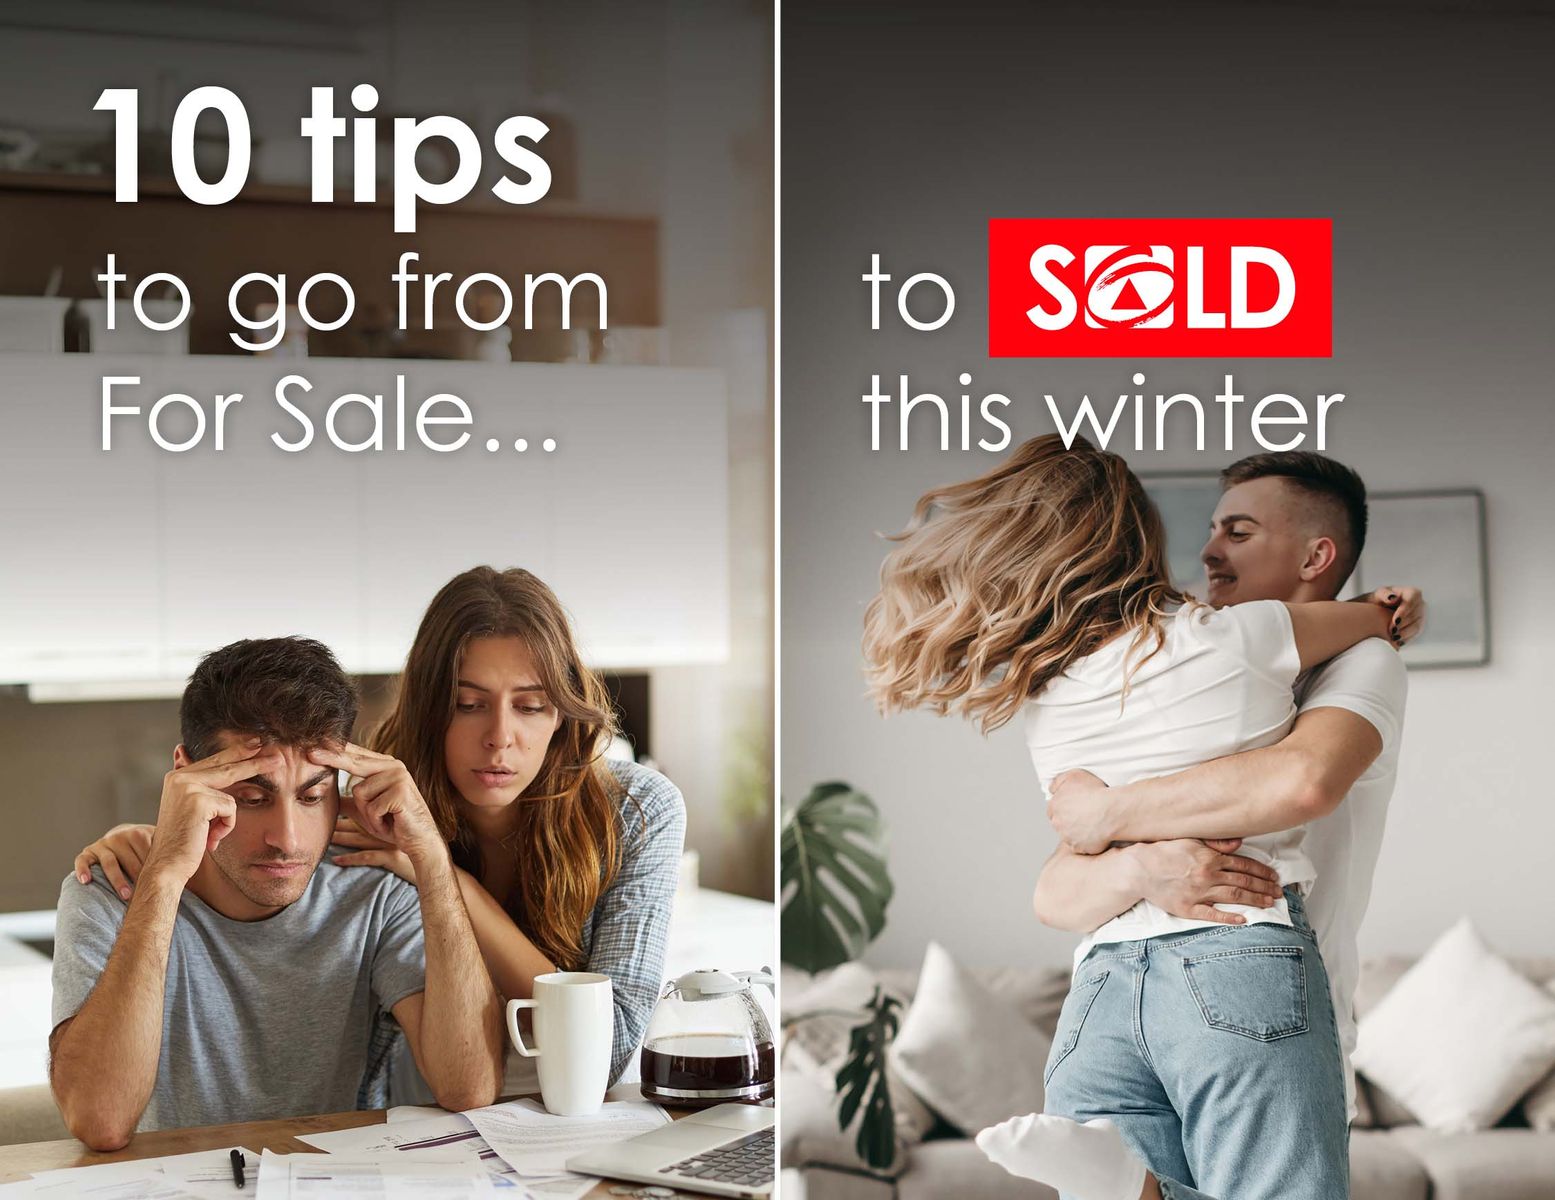 10 Tips for Selling Success this Winter